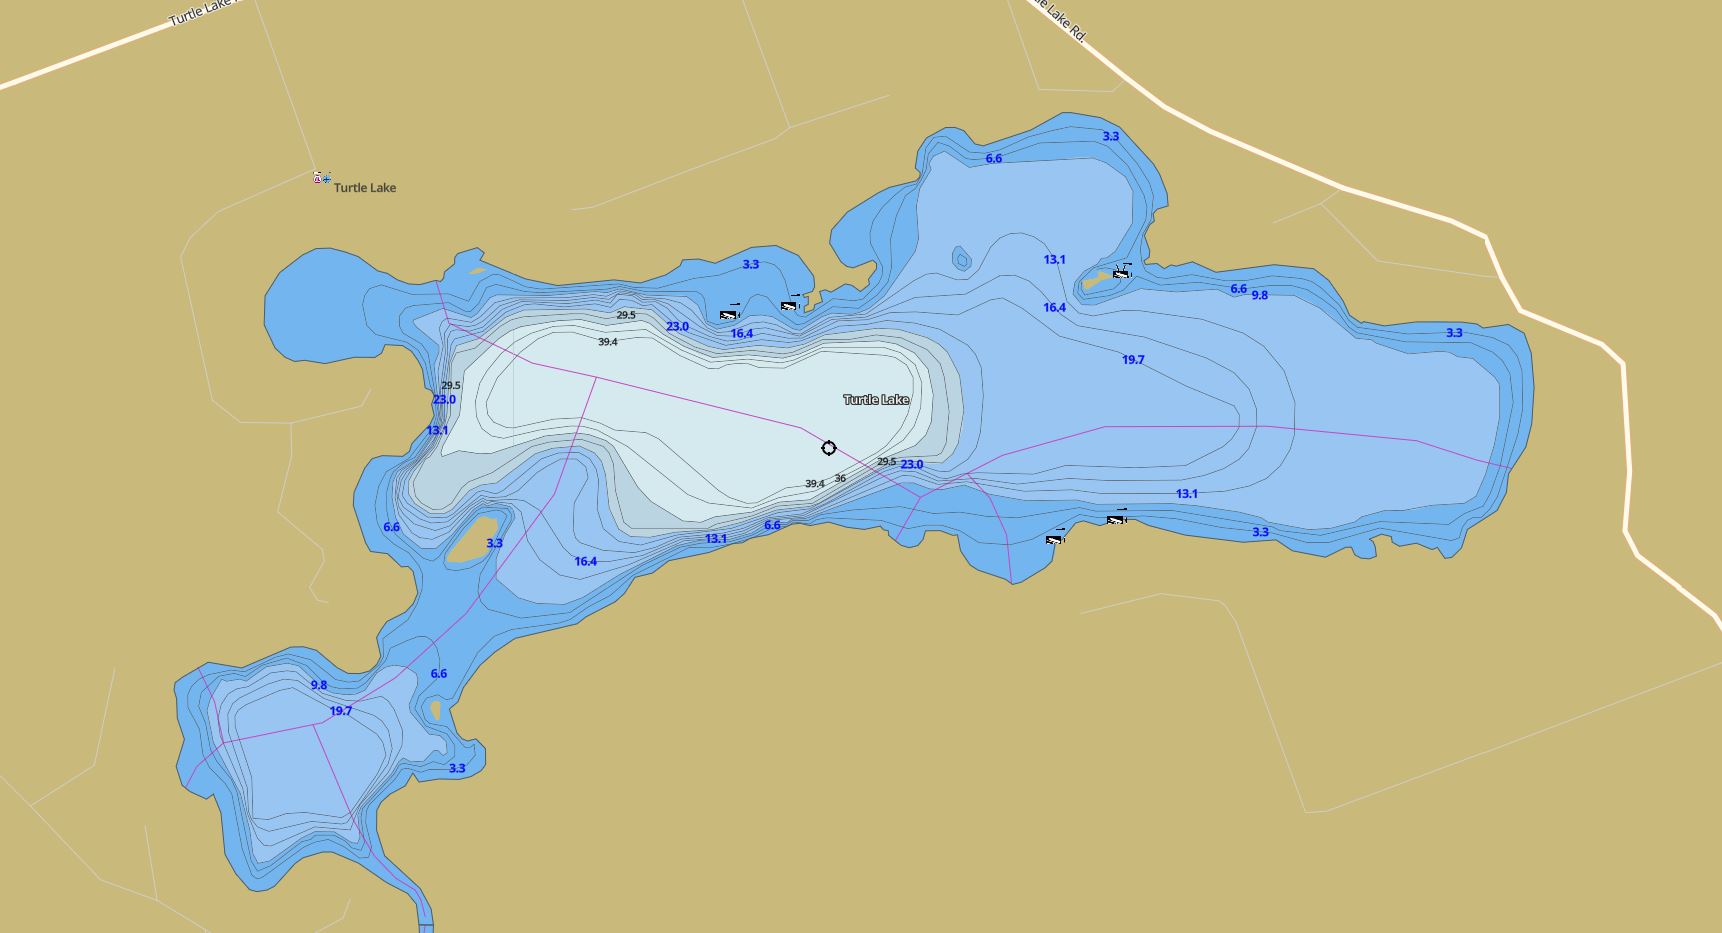 Contour Map of Turtle Lake in Municipality of Seguin and the District of Parry Sound